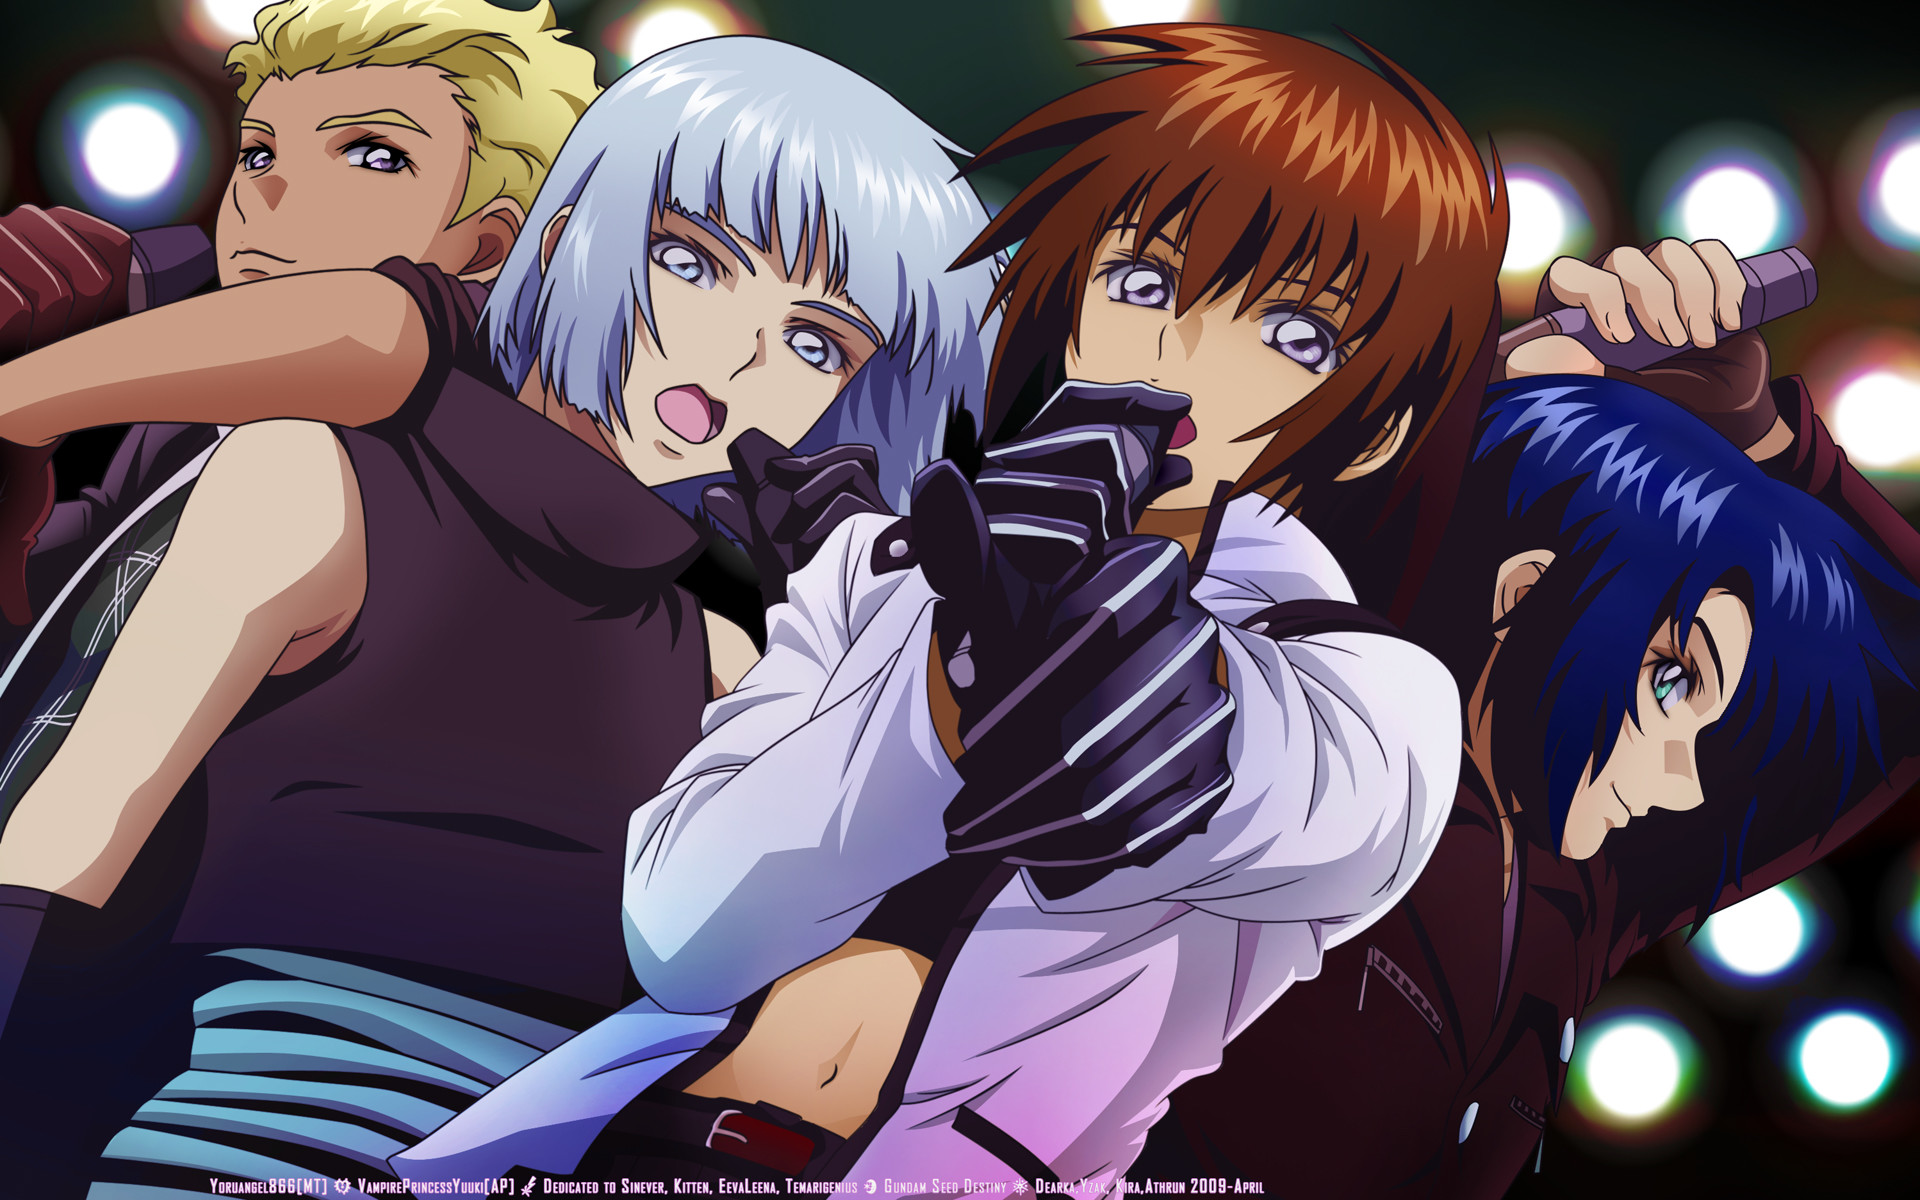 1920x1200 Mobile Suit Gundam SEED Destiny - Wallpaper and Scan Gallery - Minitokyo